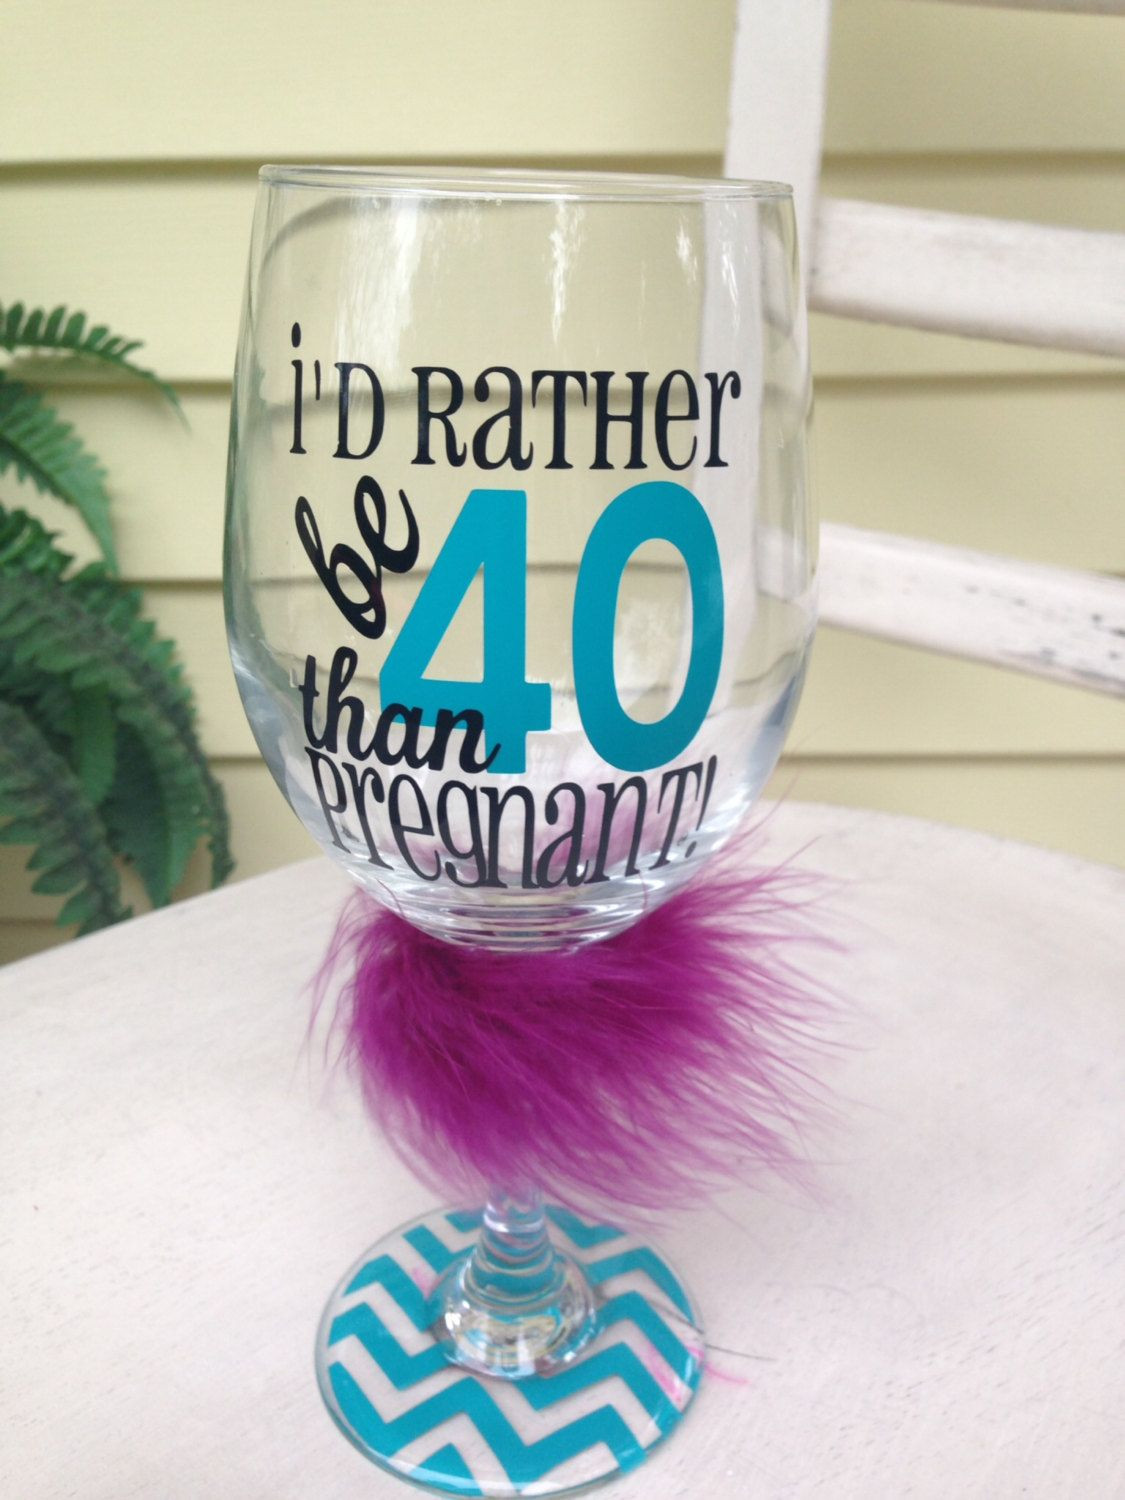 Girlfriend 40Th Birthday Gift Ideas
 I d rather be 40 than pregnant 20 oz wine glass 40th